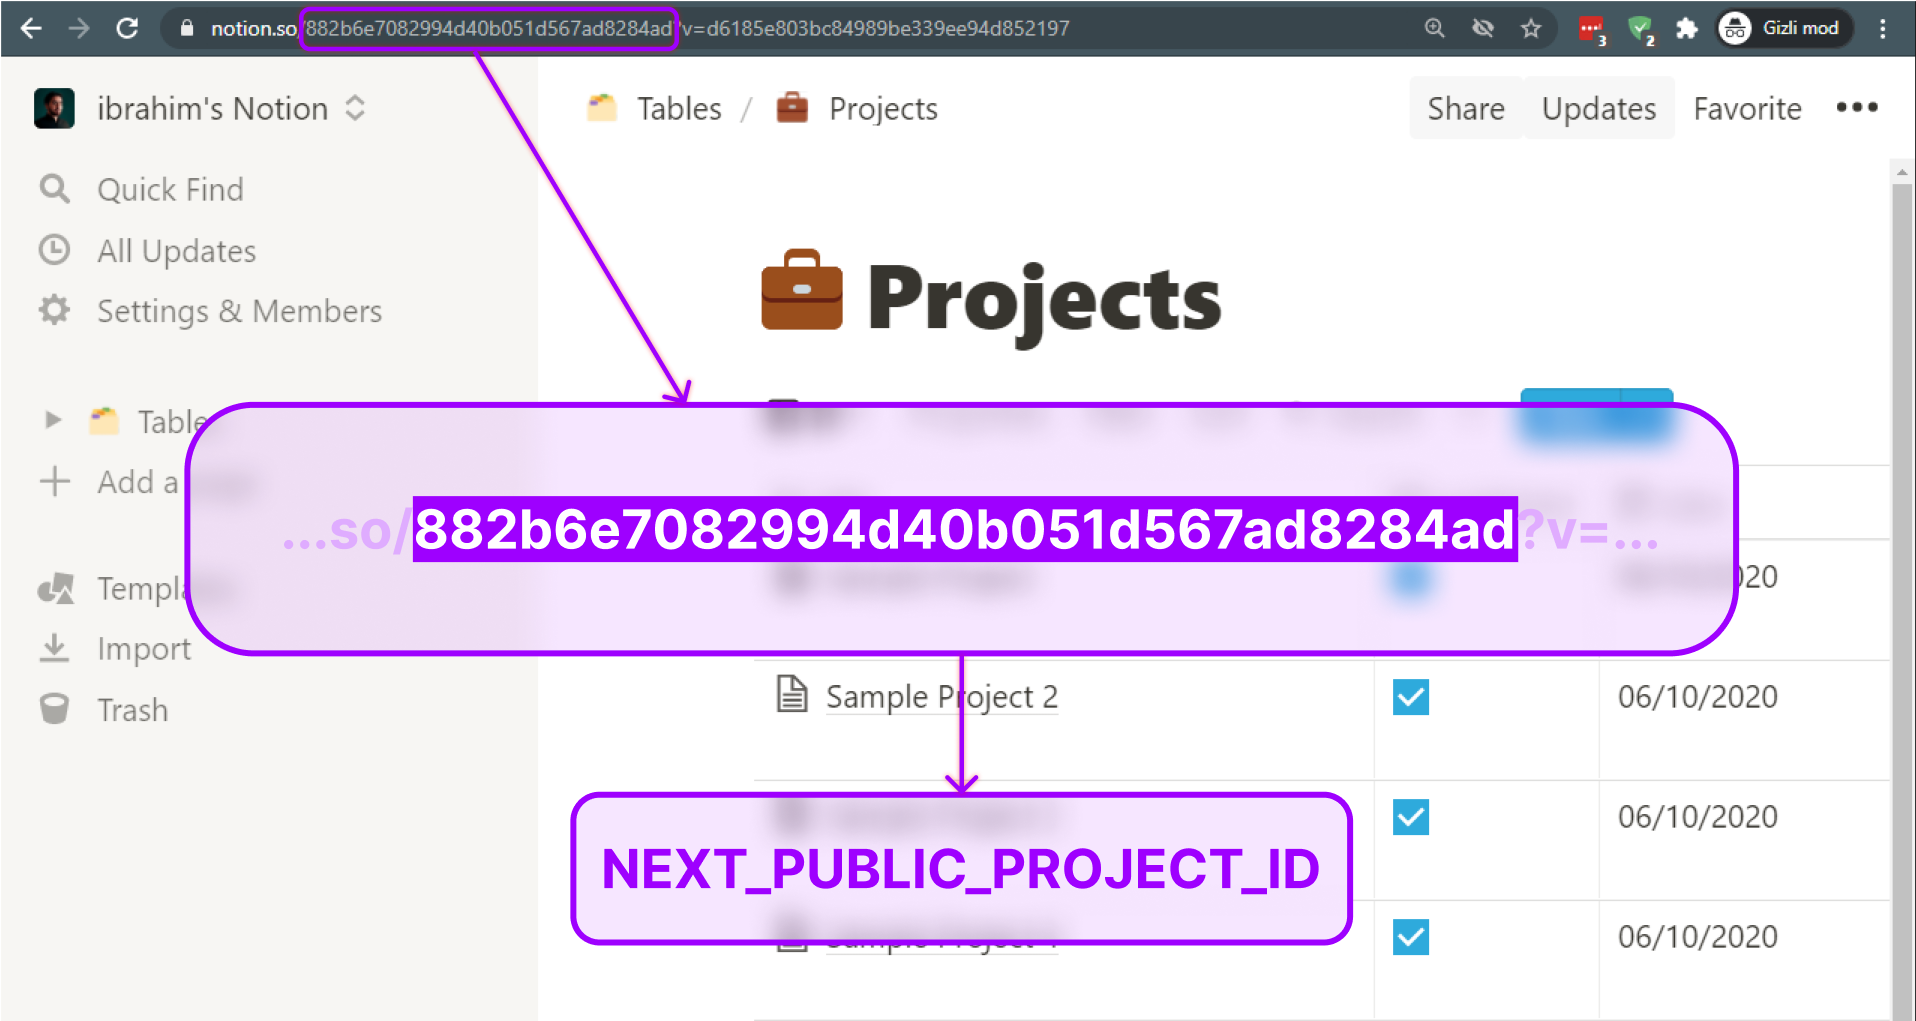 Project ID